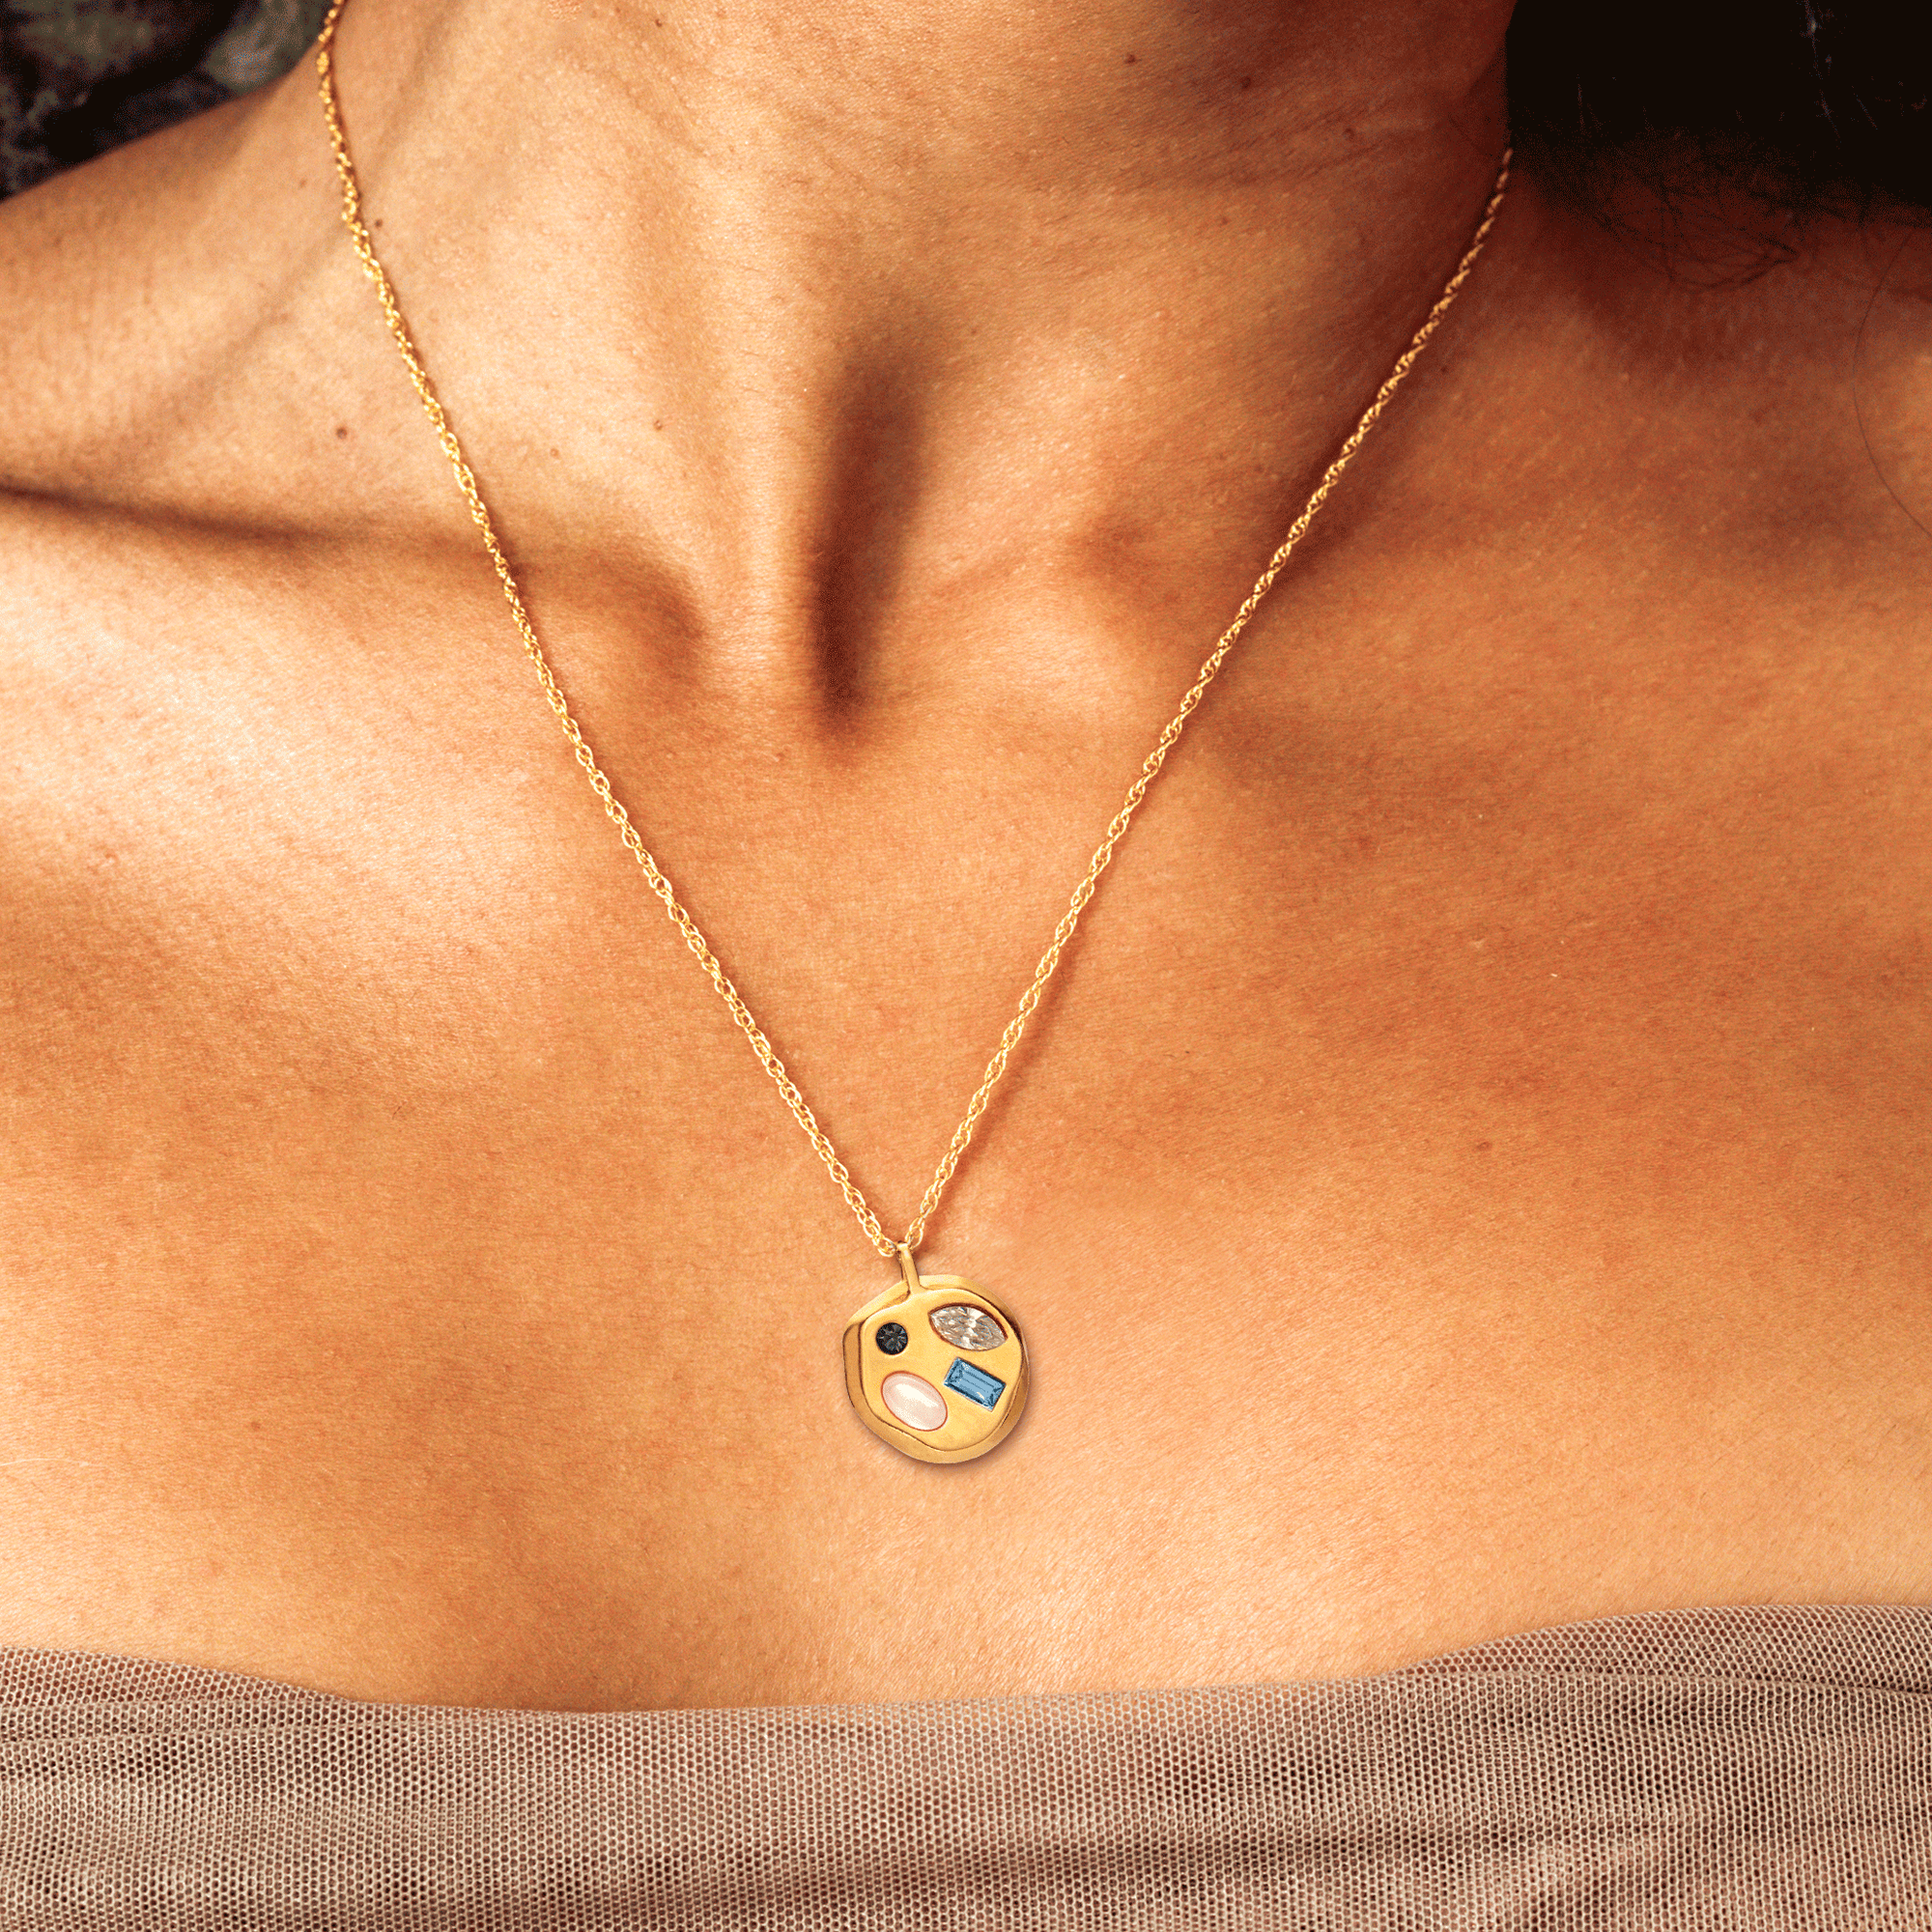 Person wearing The April Thirteenth Pendant